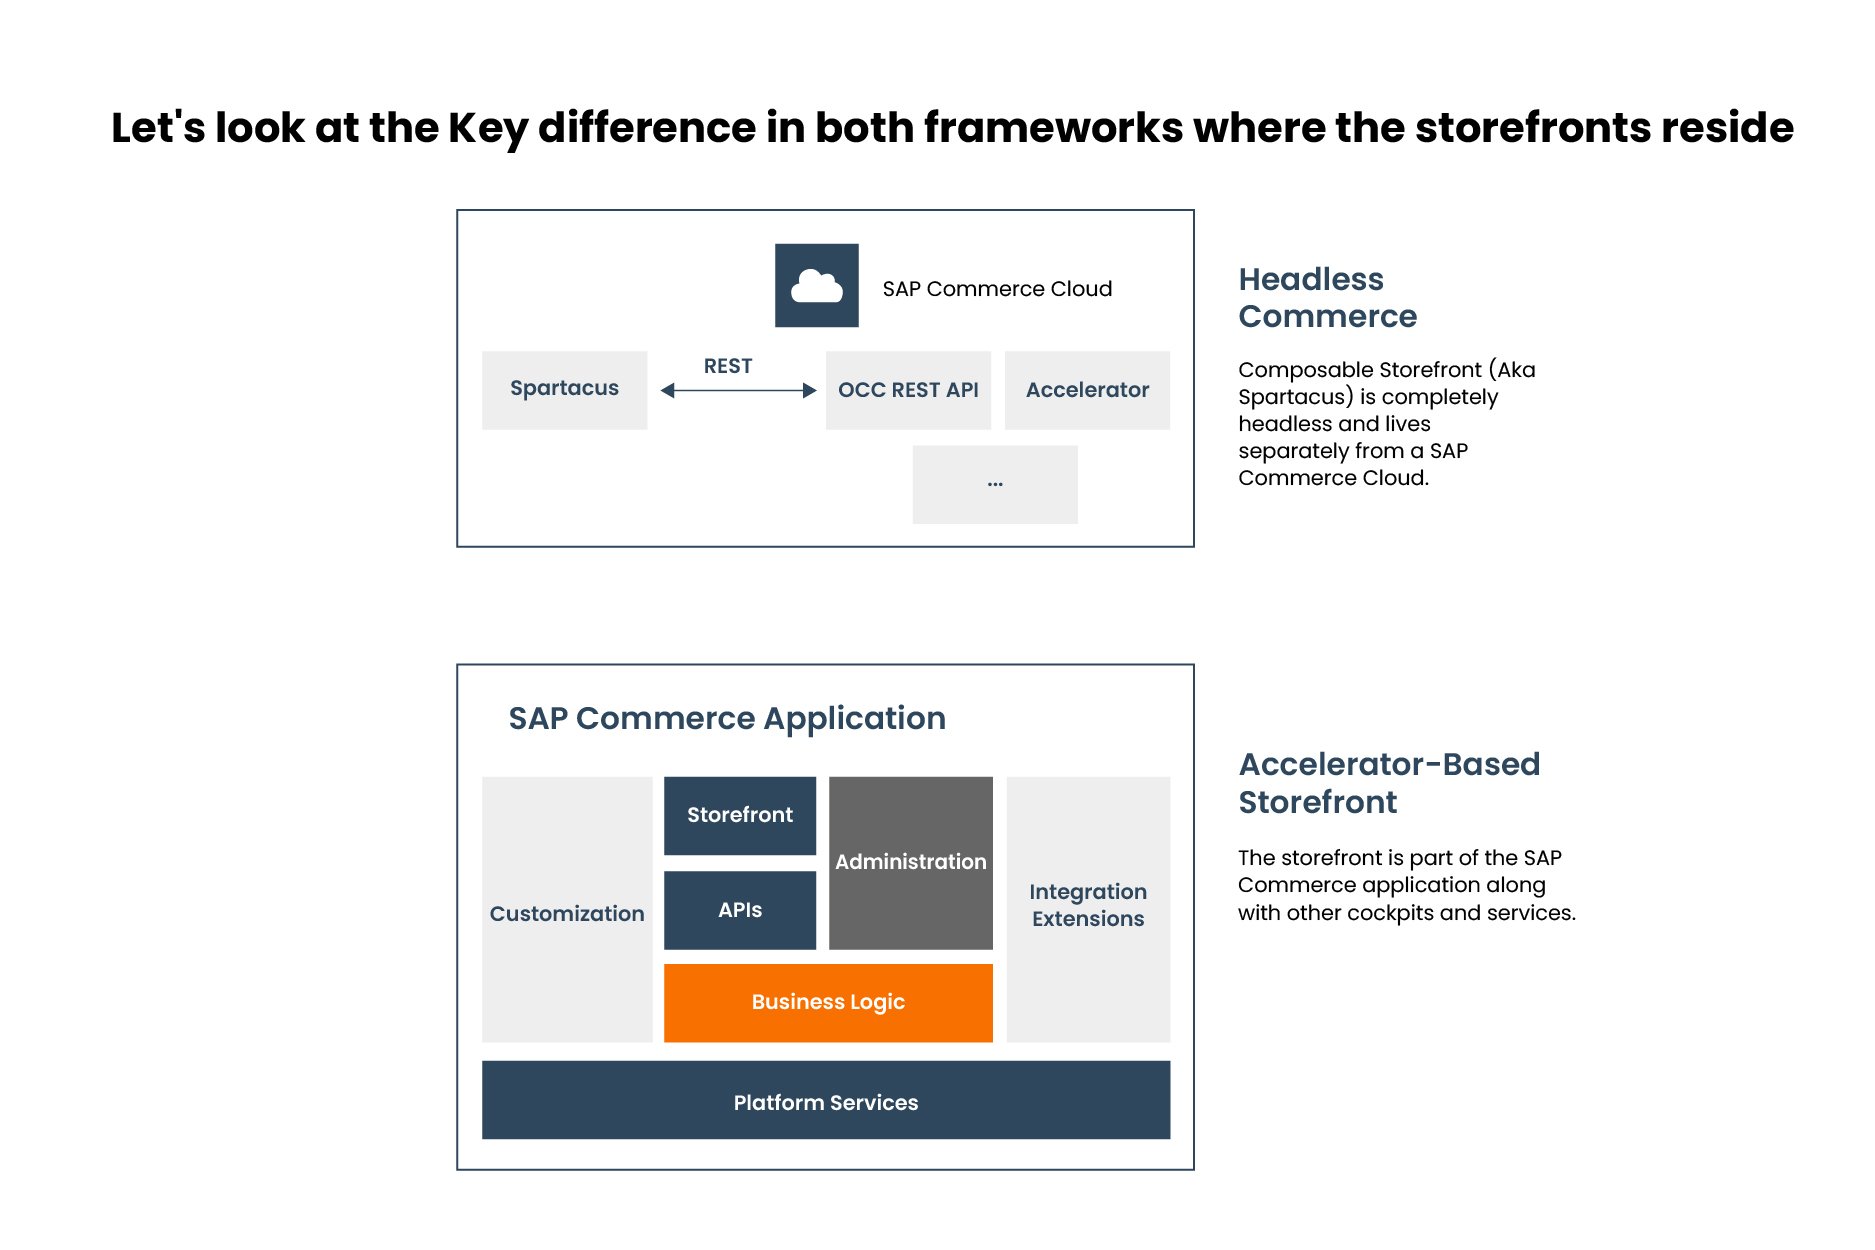 Key difference between Accelerator and Composable Storefronts